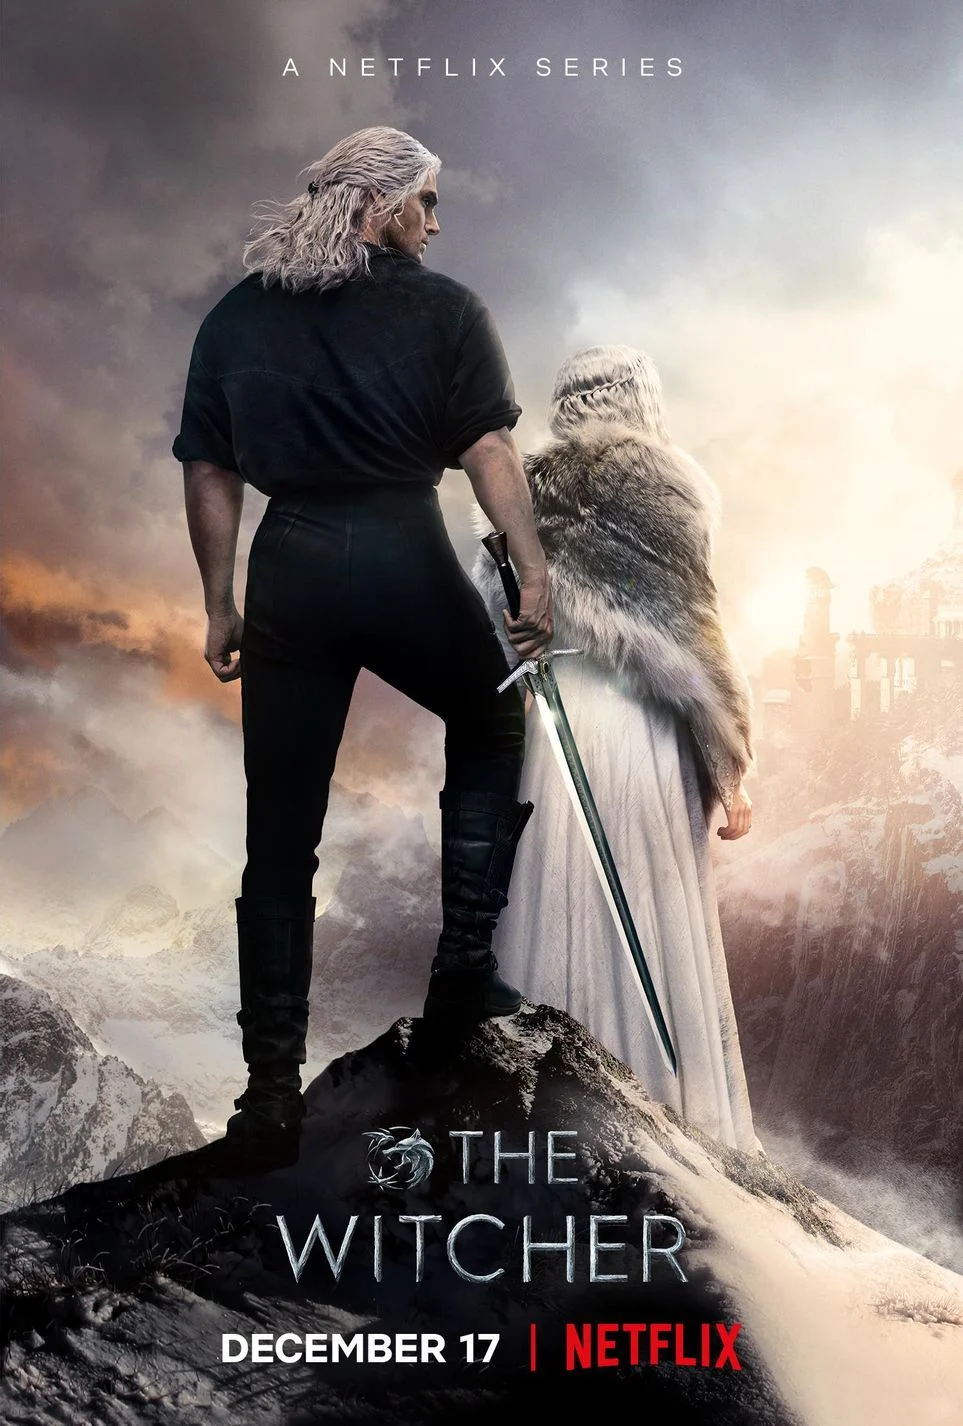 The Witcher 2021 Season 2 Hindi Dubbed Web Series 15168 Poster.jpg